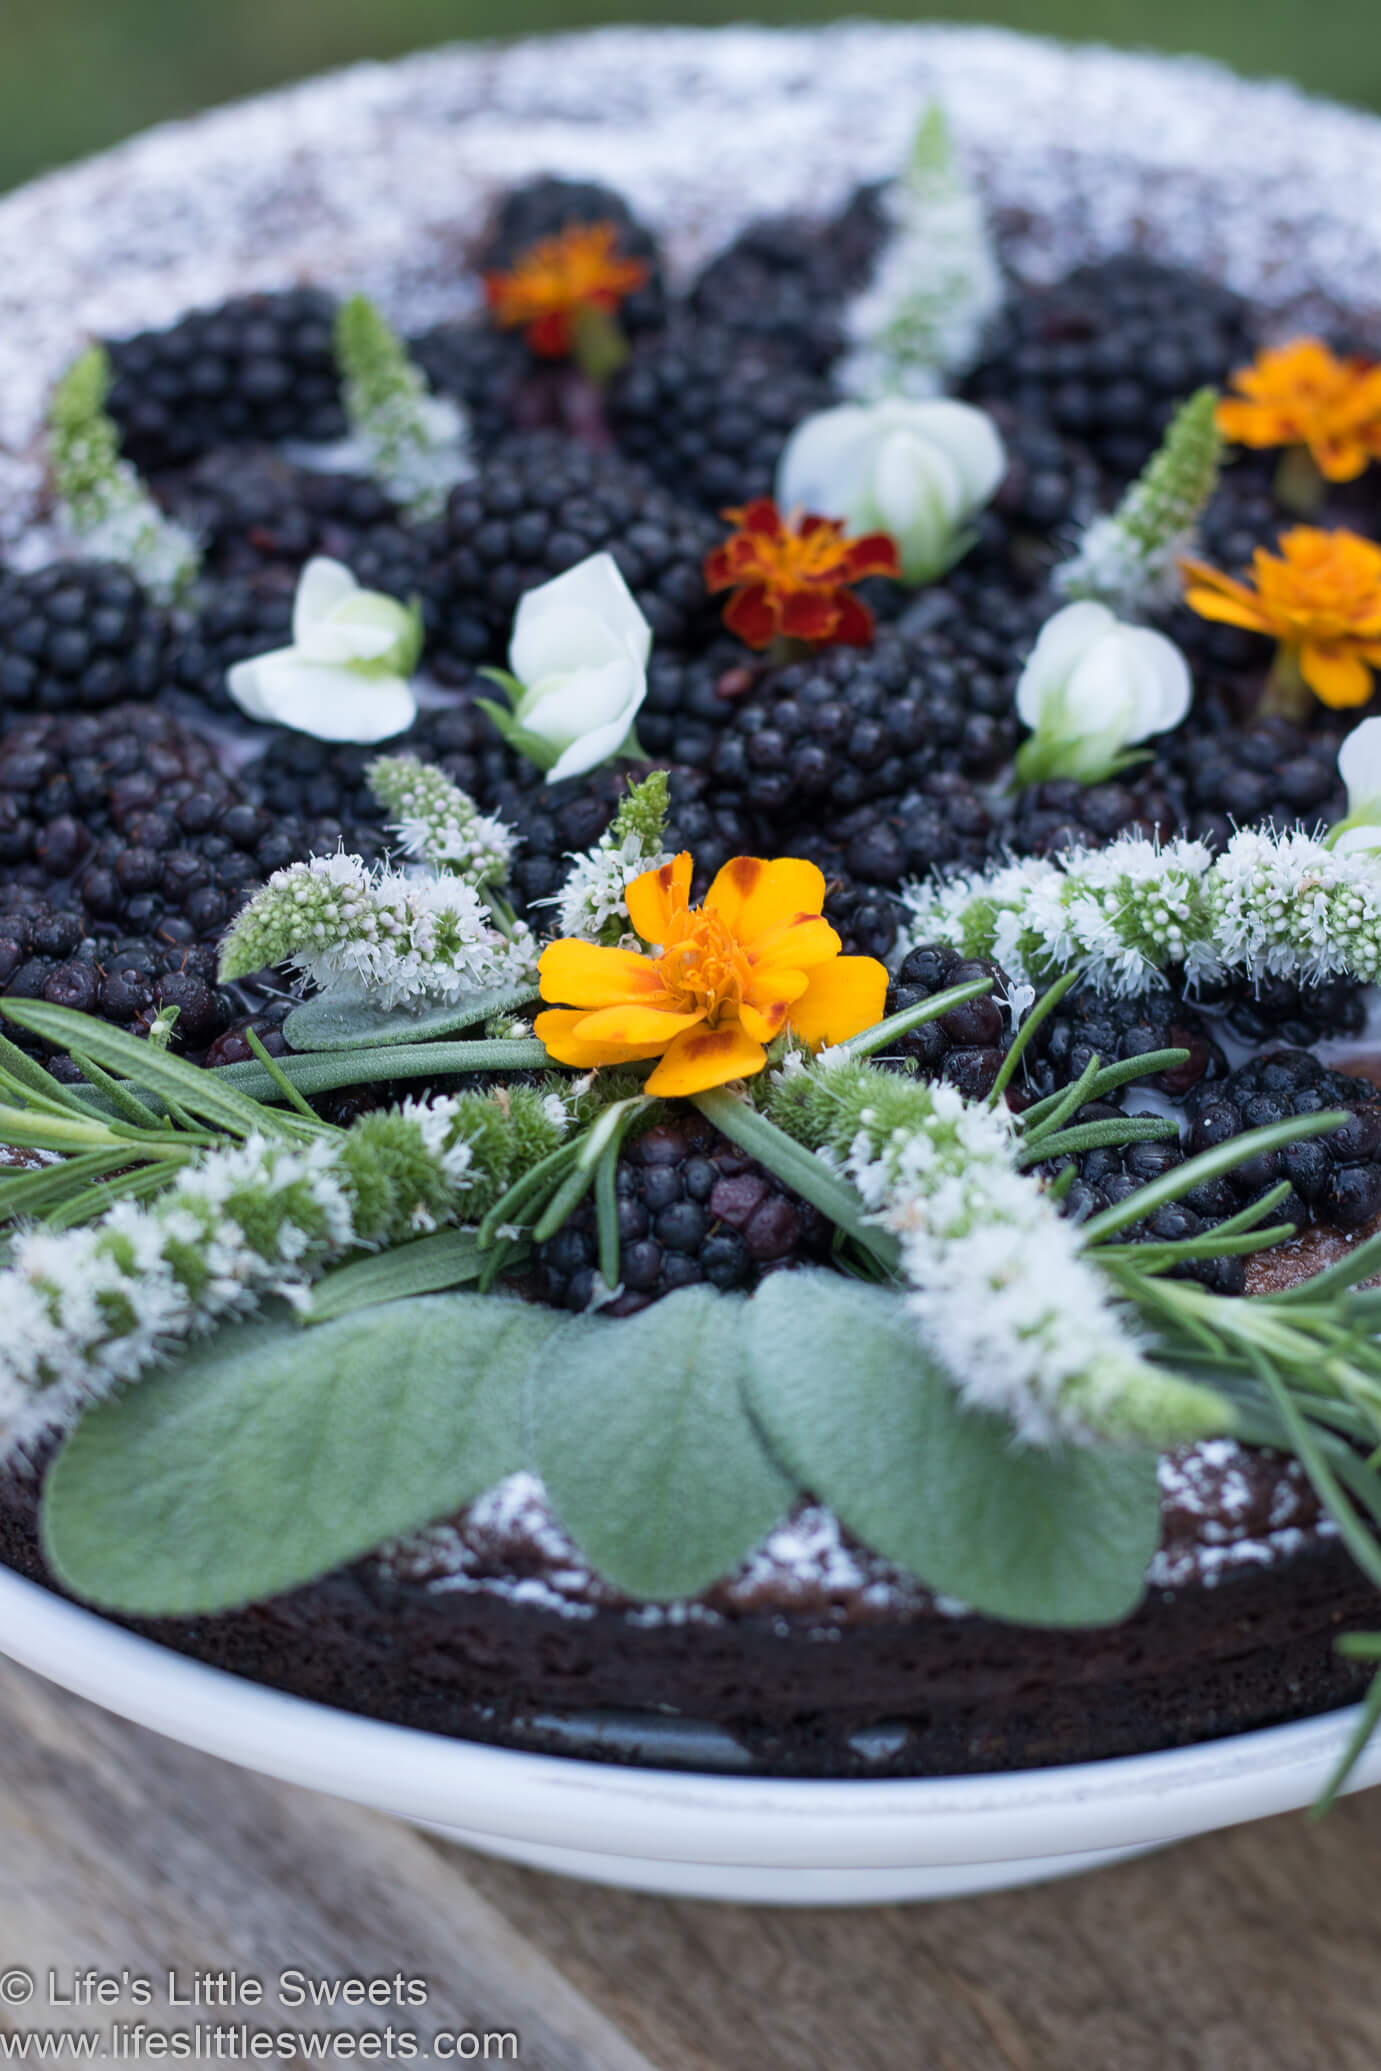 Flourless Chocolate Cake with Blackberries and Edible Flowers